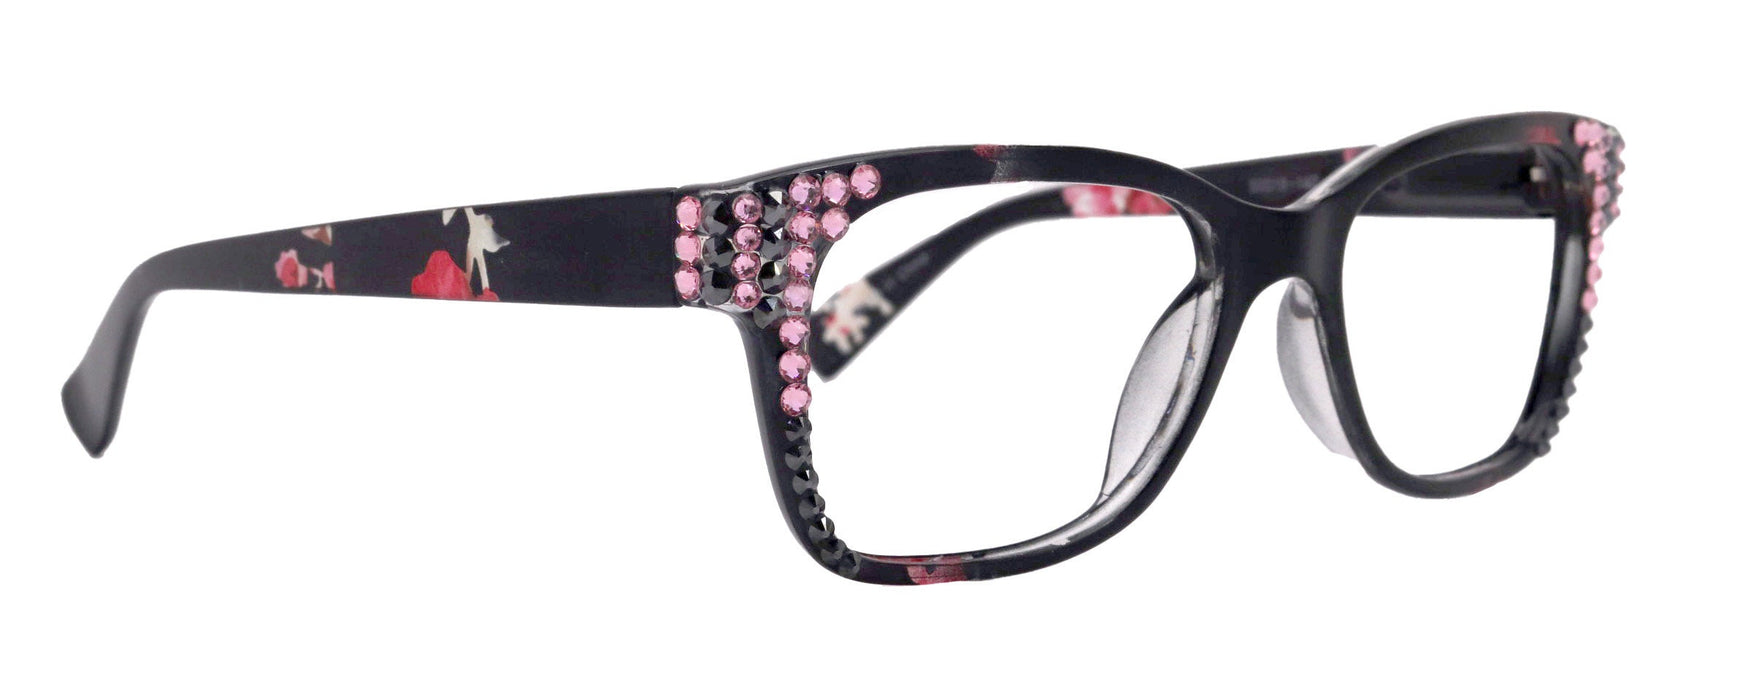 Azul, (Bling) Reading Glasses 4 Women W (Hematite N Rose)Genuine European Crystals. +1.5..+5 NY Fifth Avenue (Wide frame)